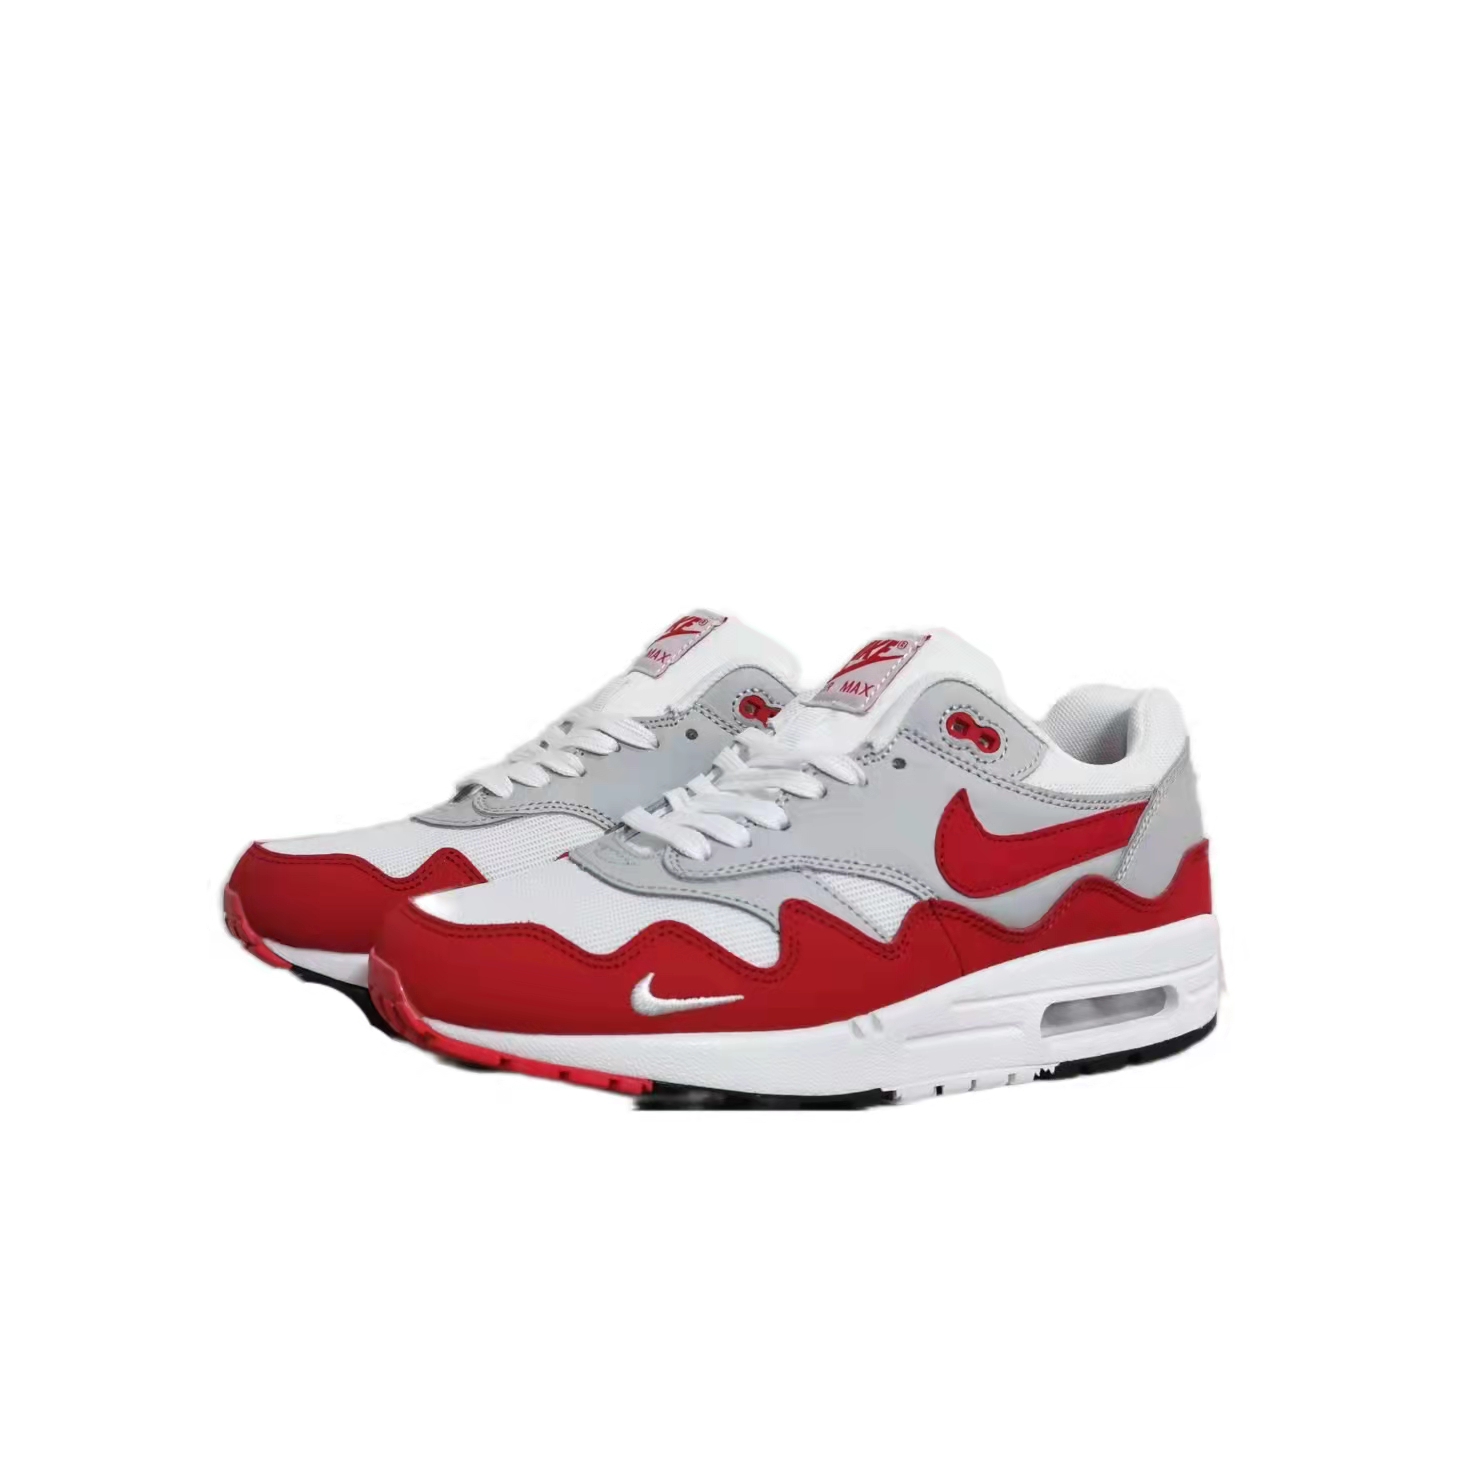 2021 Nike Air Max 87 White Grey Red Shoes